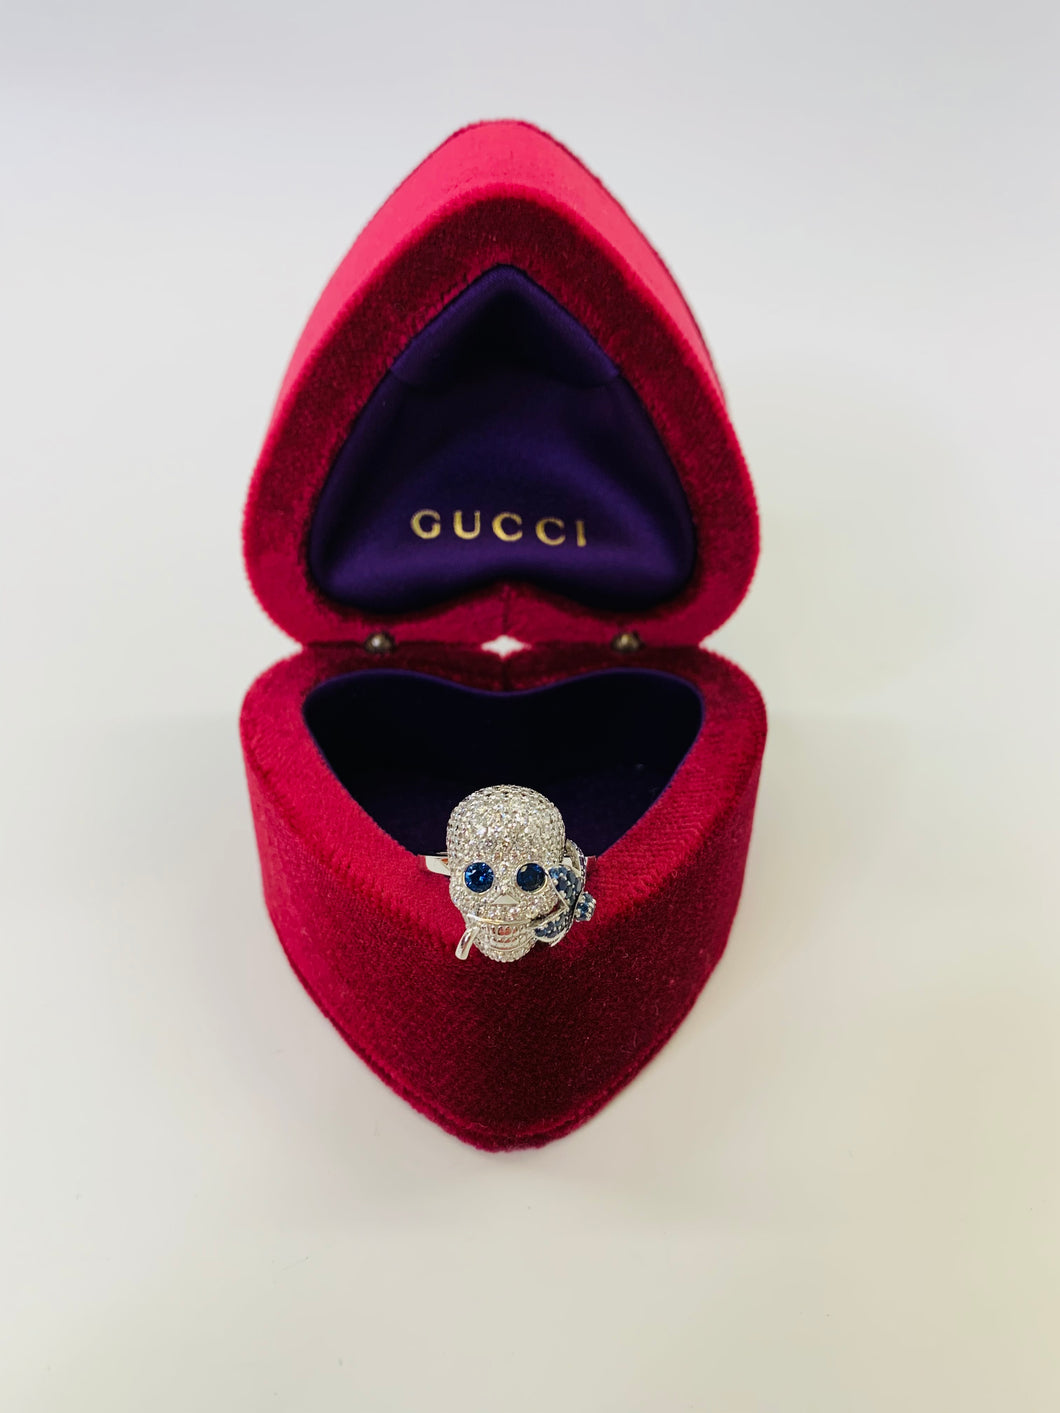 Gucci 18K White Gold, Diamond and Sapphire Skull Ring Size 6